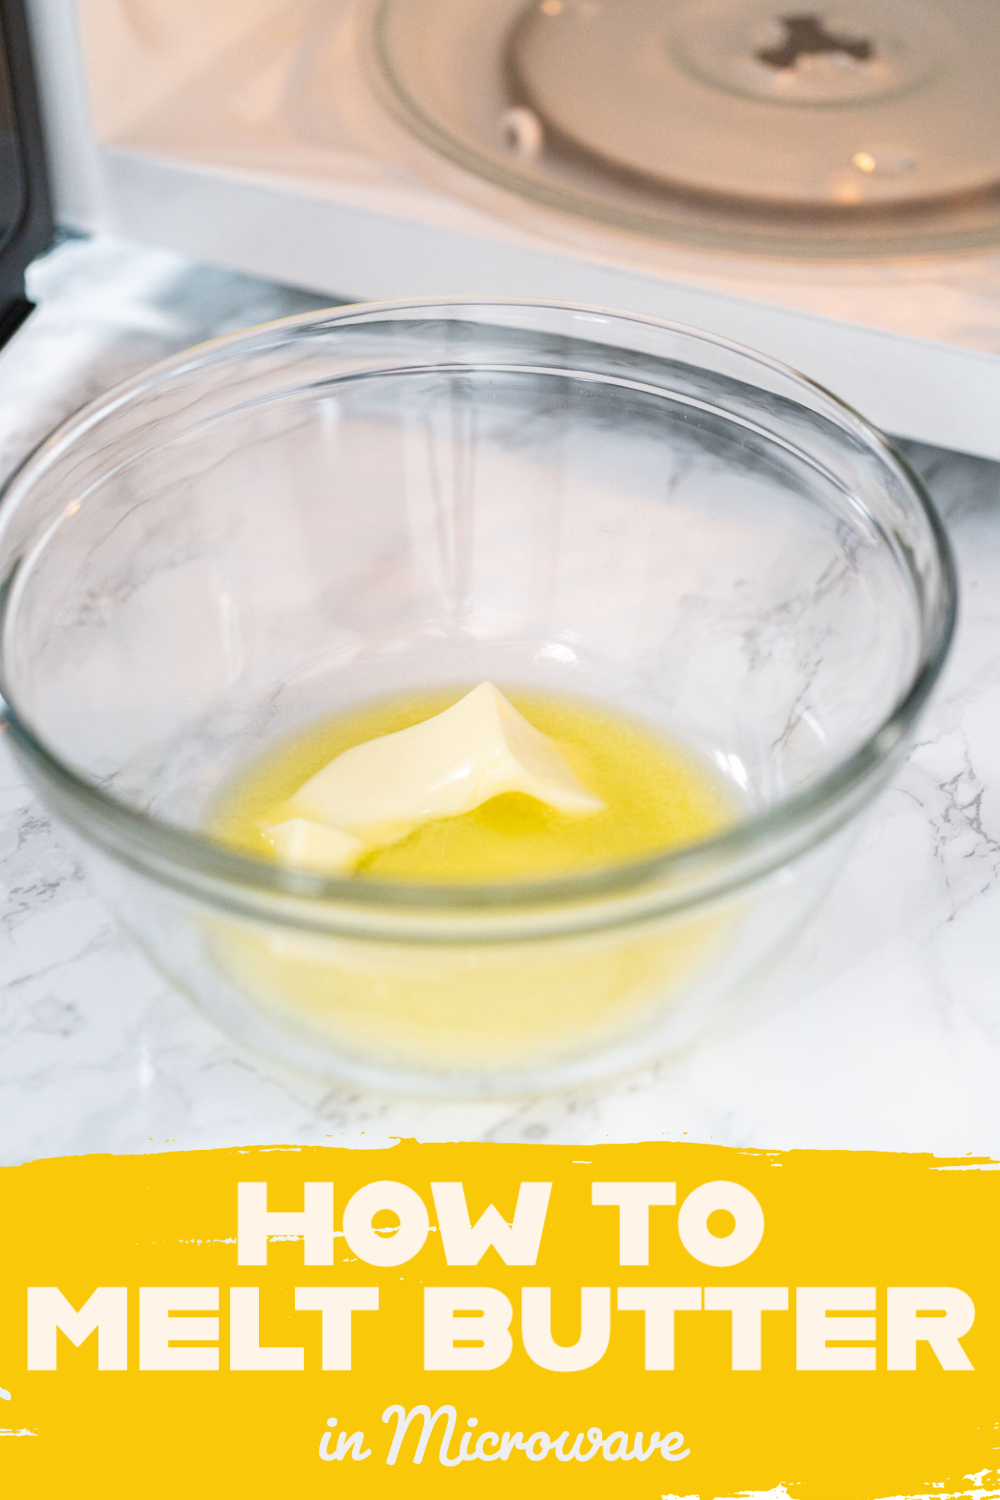 How to Melt Butter in Microwave